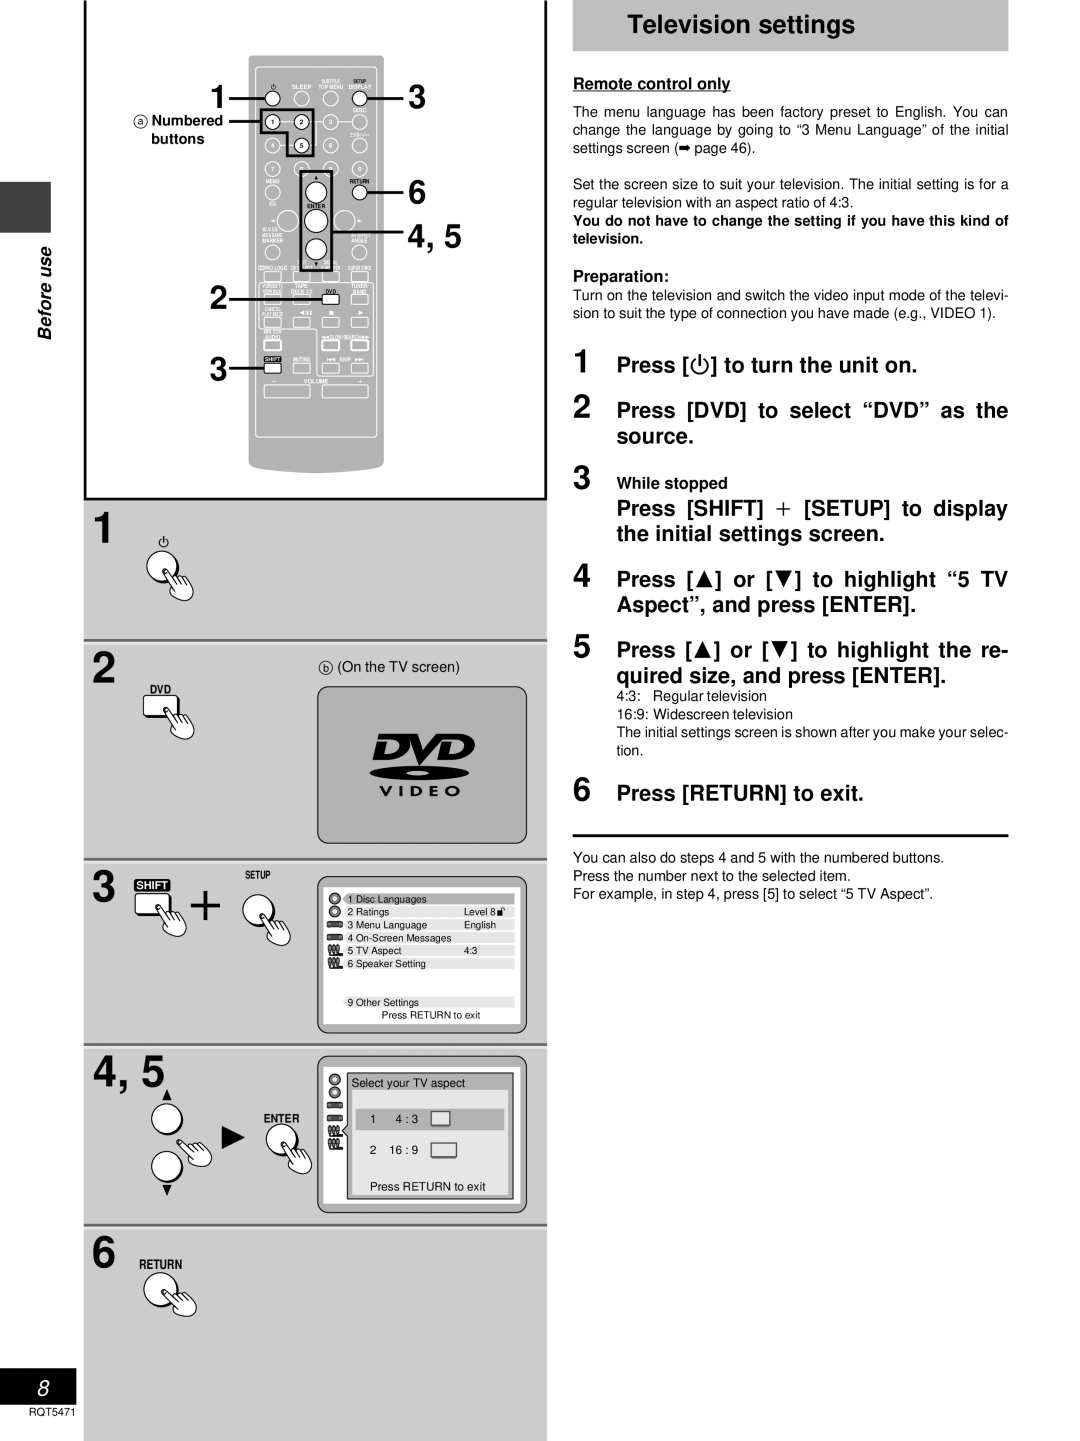 Technics SC-DV170 Television settings, Press DVD to select “DVD” as the source, Press 3 or 4 to highlight “5 TV, buttons 